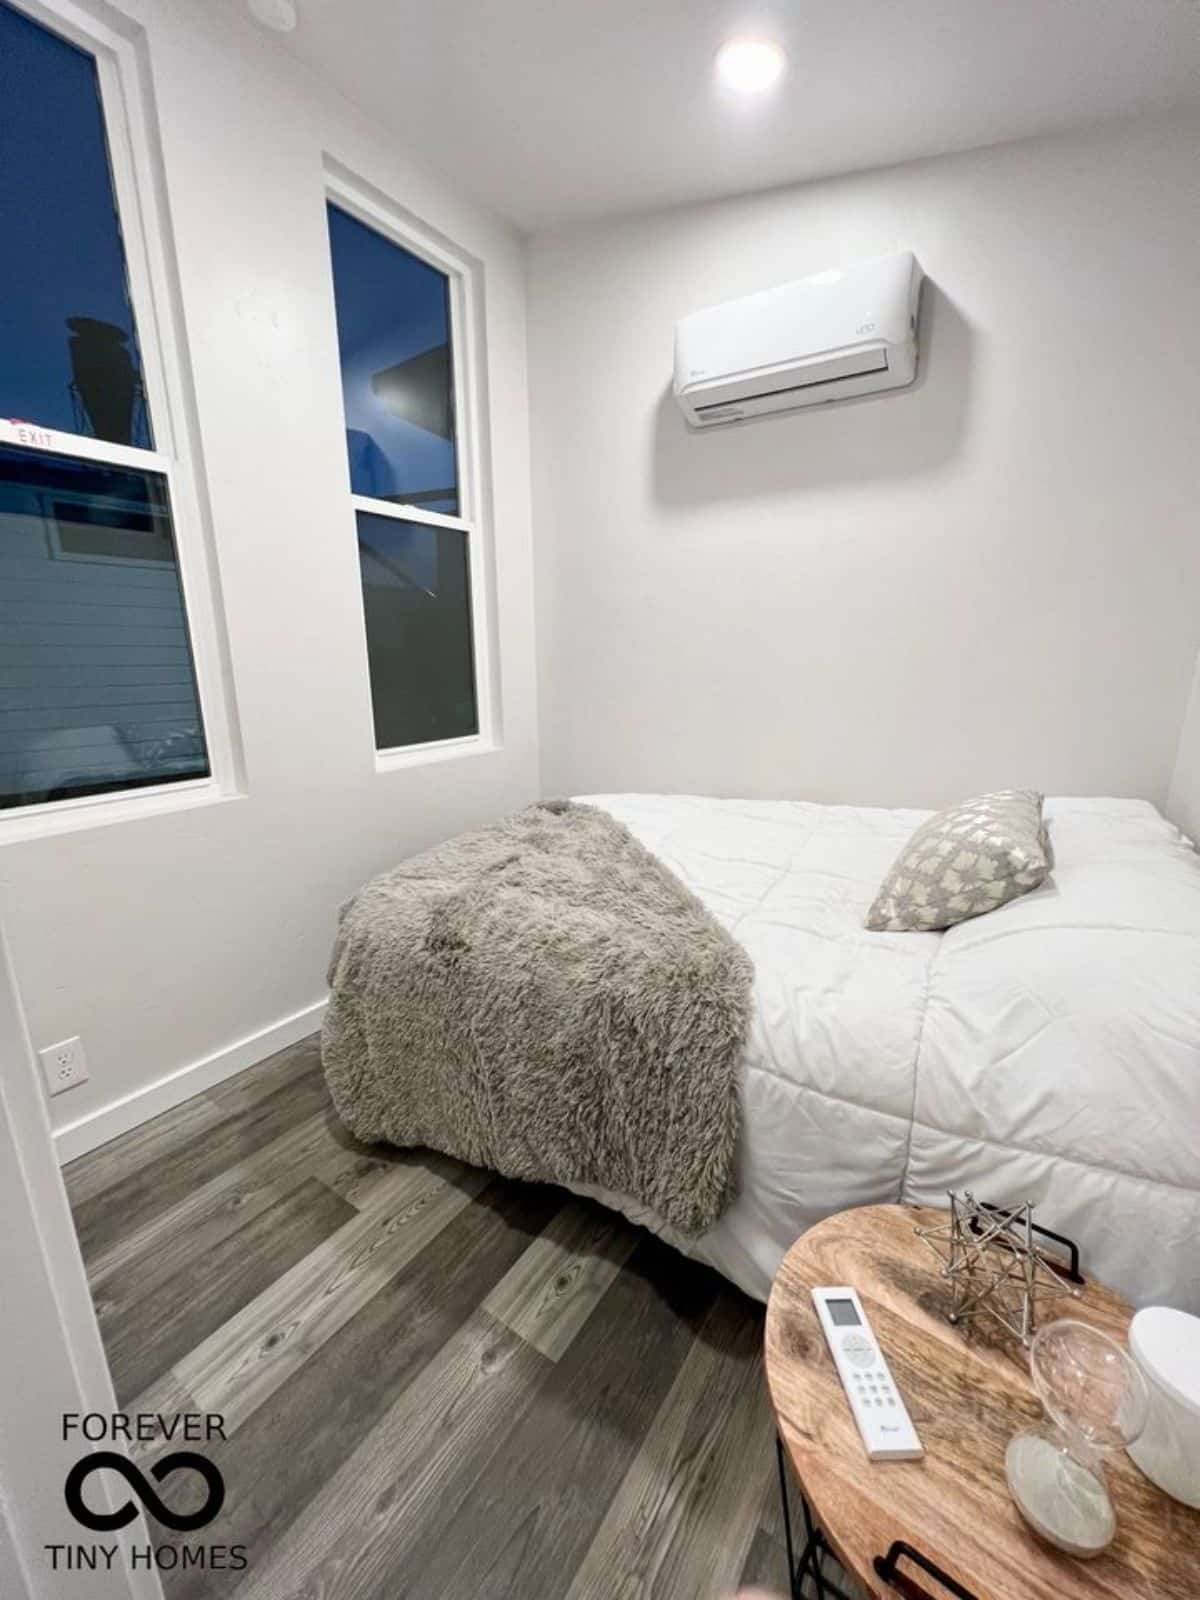 Cozy and comfortable bedroom area of Forever Tiny Home